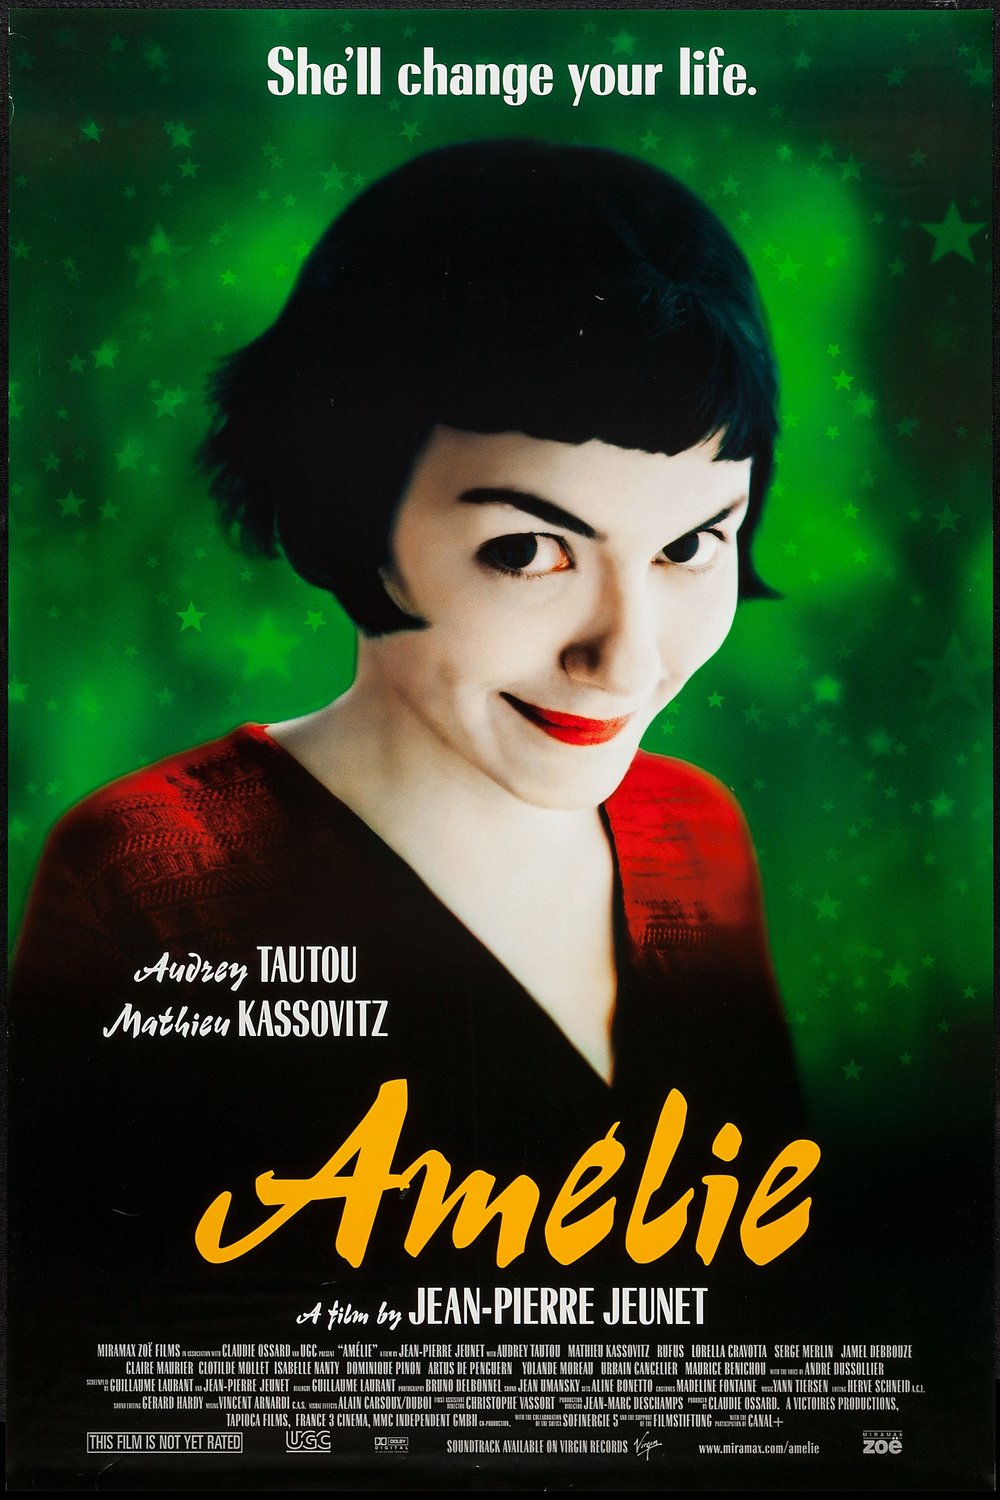 Poster of the movie Amelie